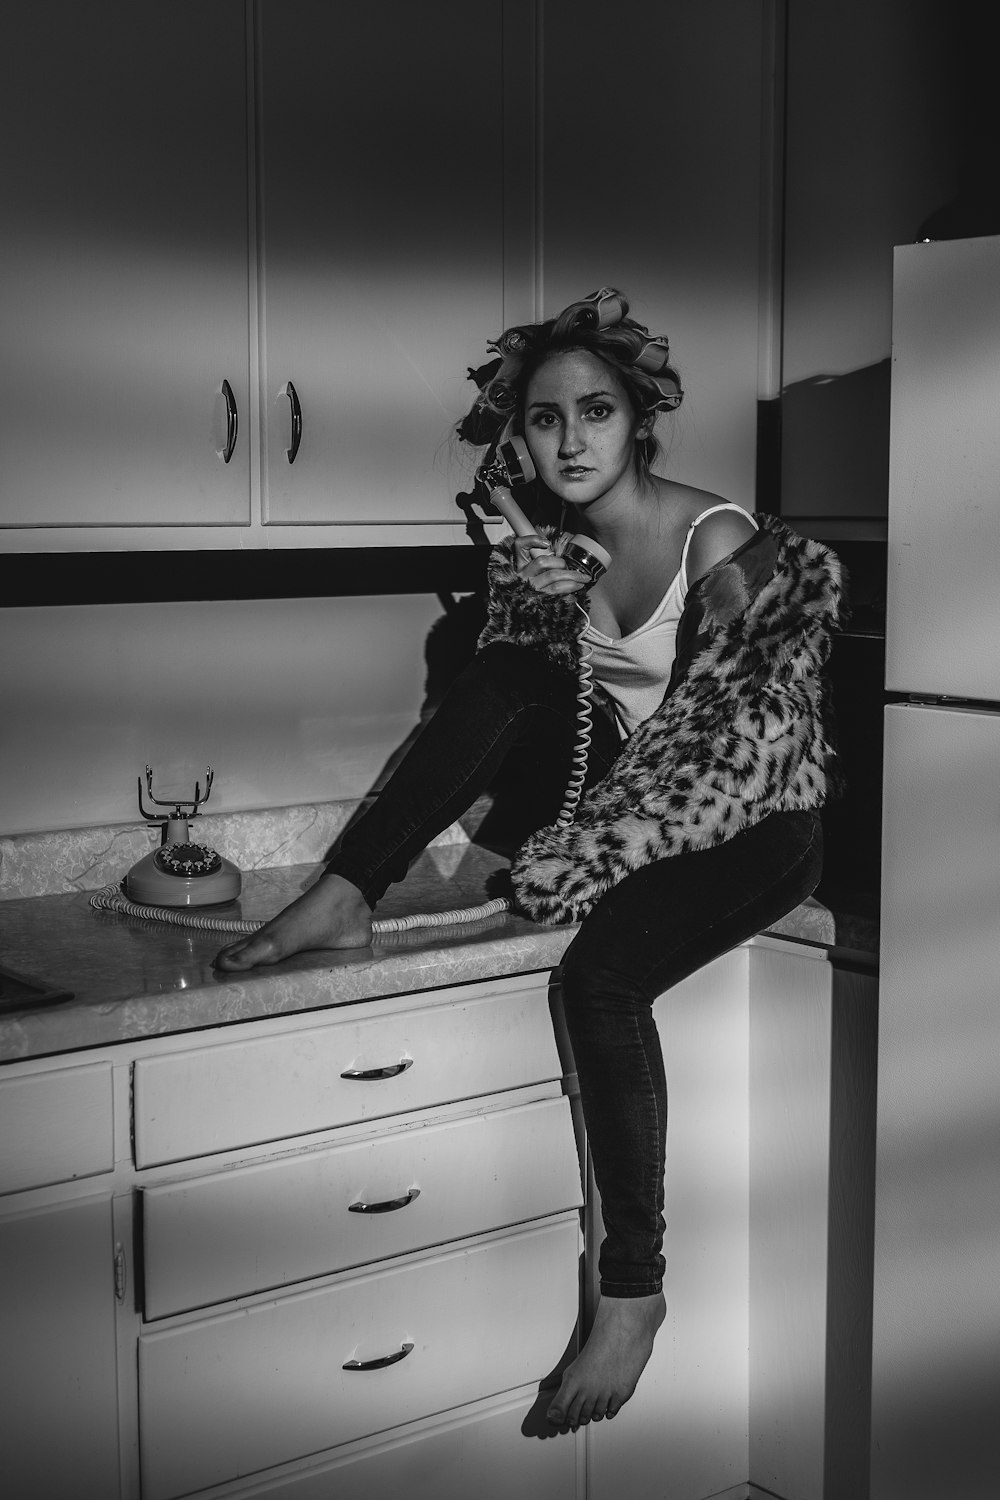 woman in black and white spaghetti strap top and black pants sitting on kitchen sink